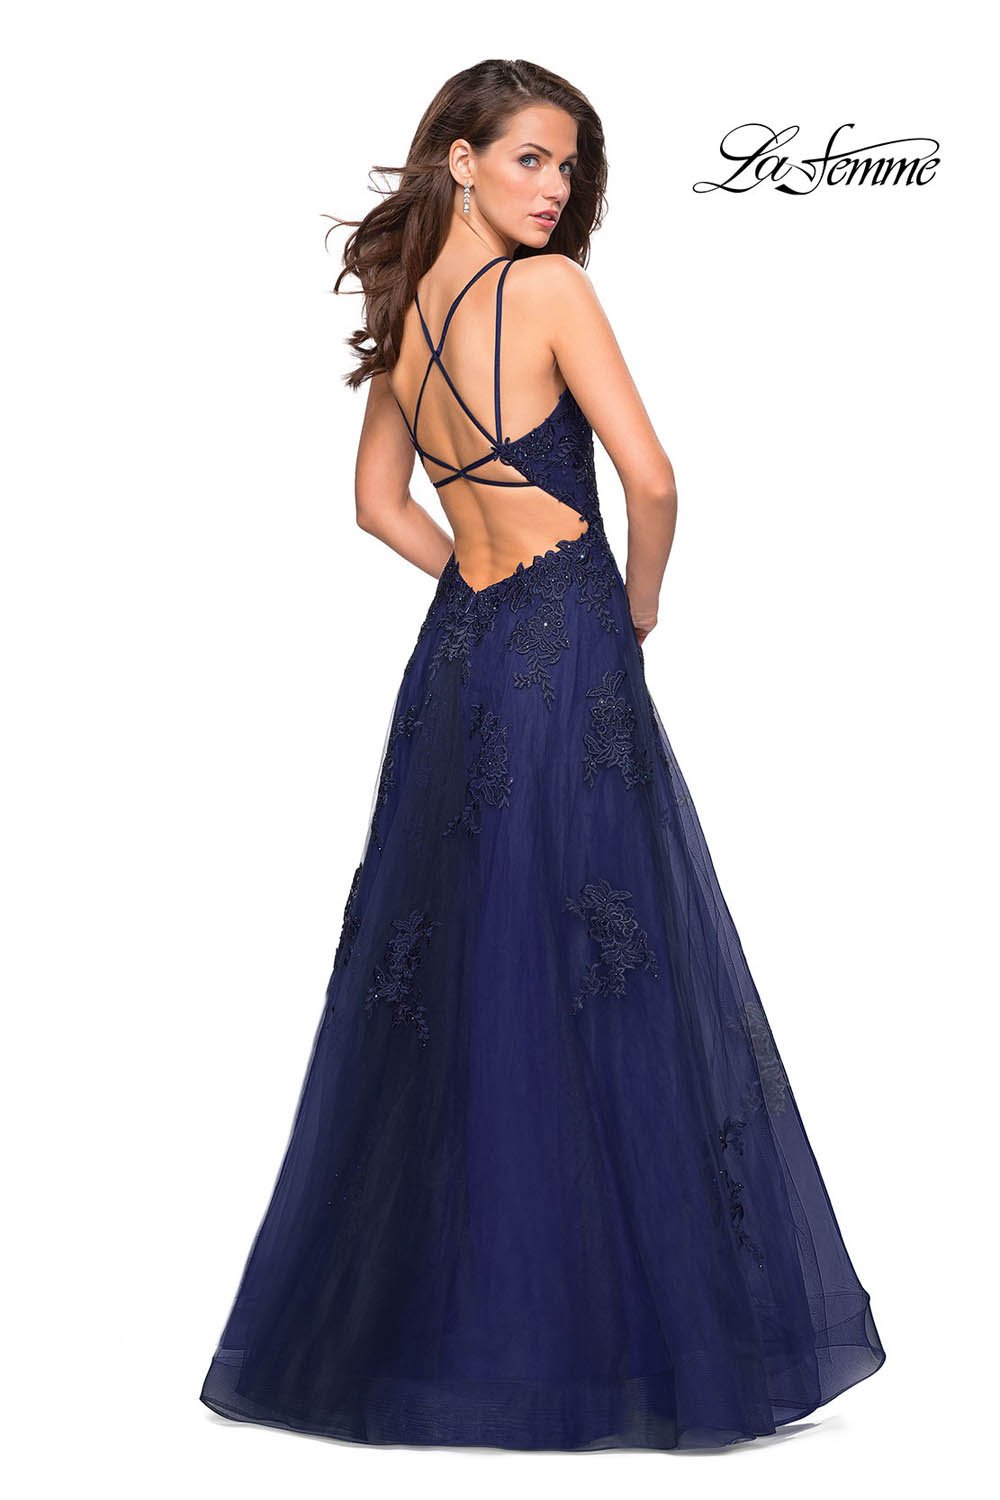 La Femme 27143 dress images in these colors: Dark Berry, Navy, Platinum.